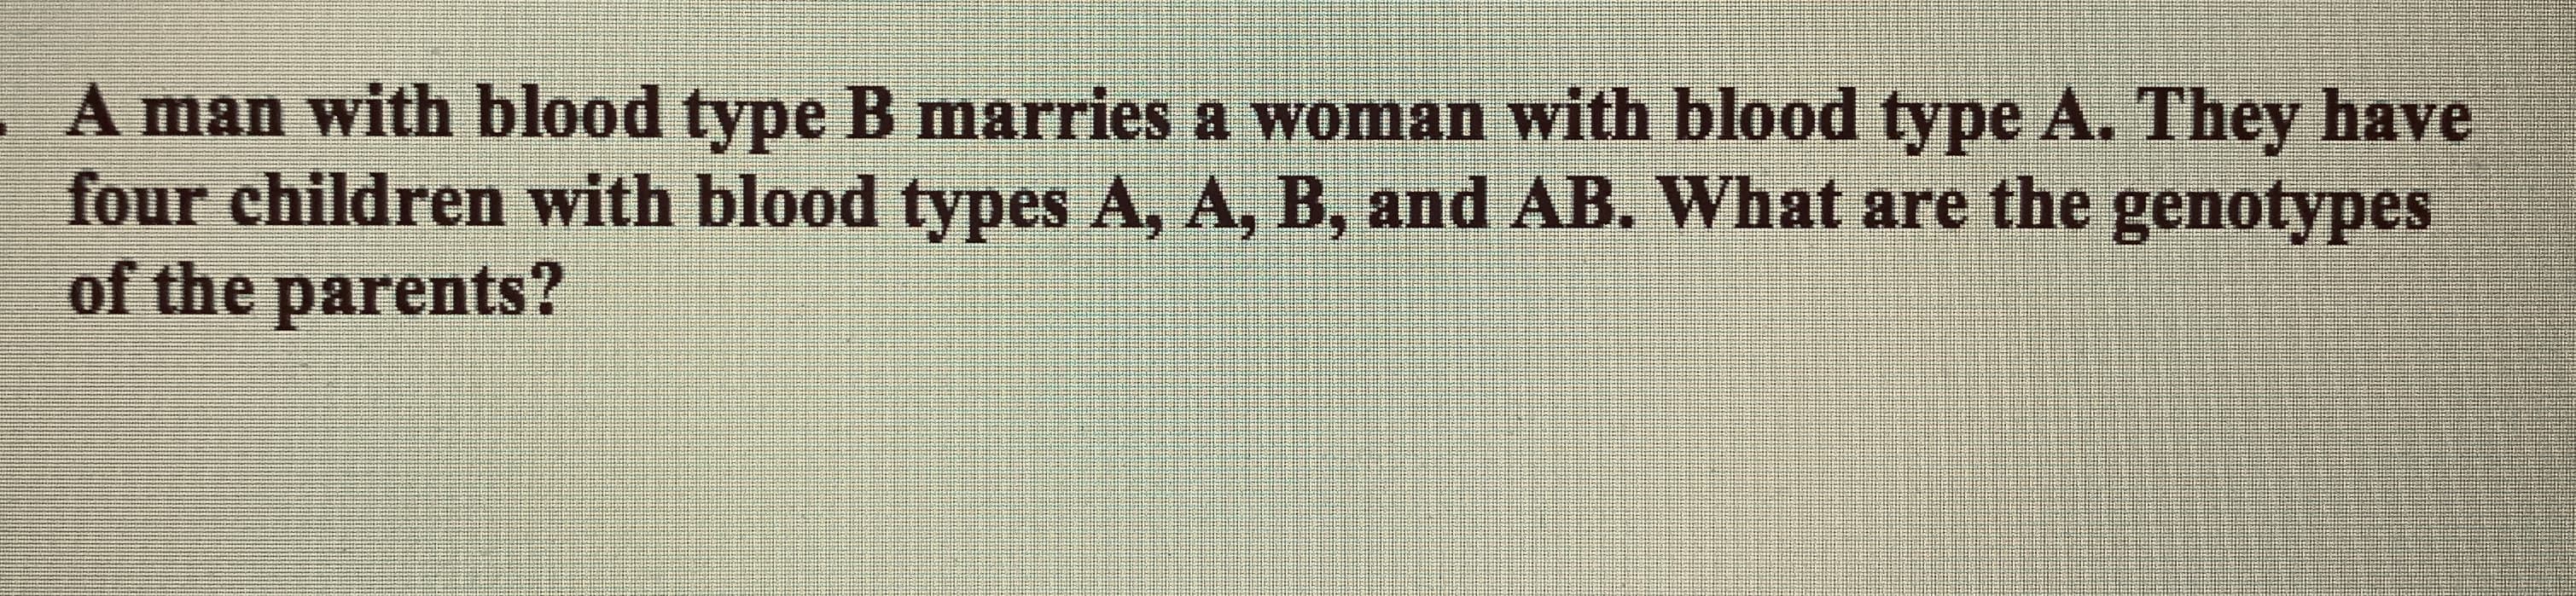 A man with blood type B marries a woman with blood type A. They have
four children with blood types A, A, B, and AB. What are the genotypes
of the parents?
